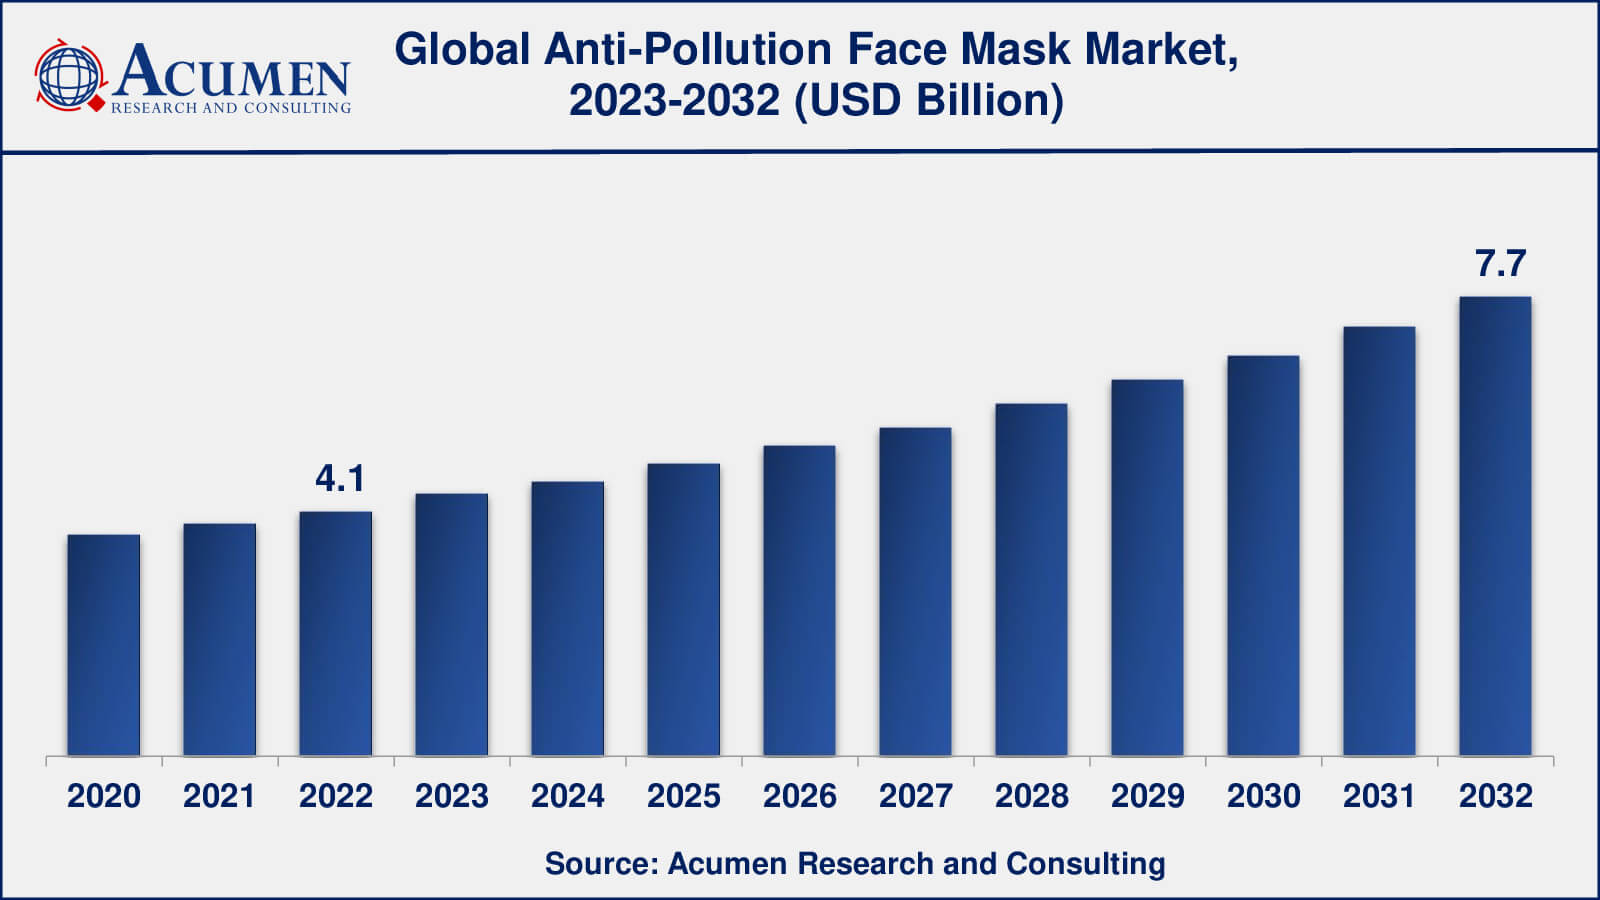 Anti-Pollution Face Mask Market Opportunities